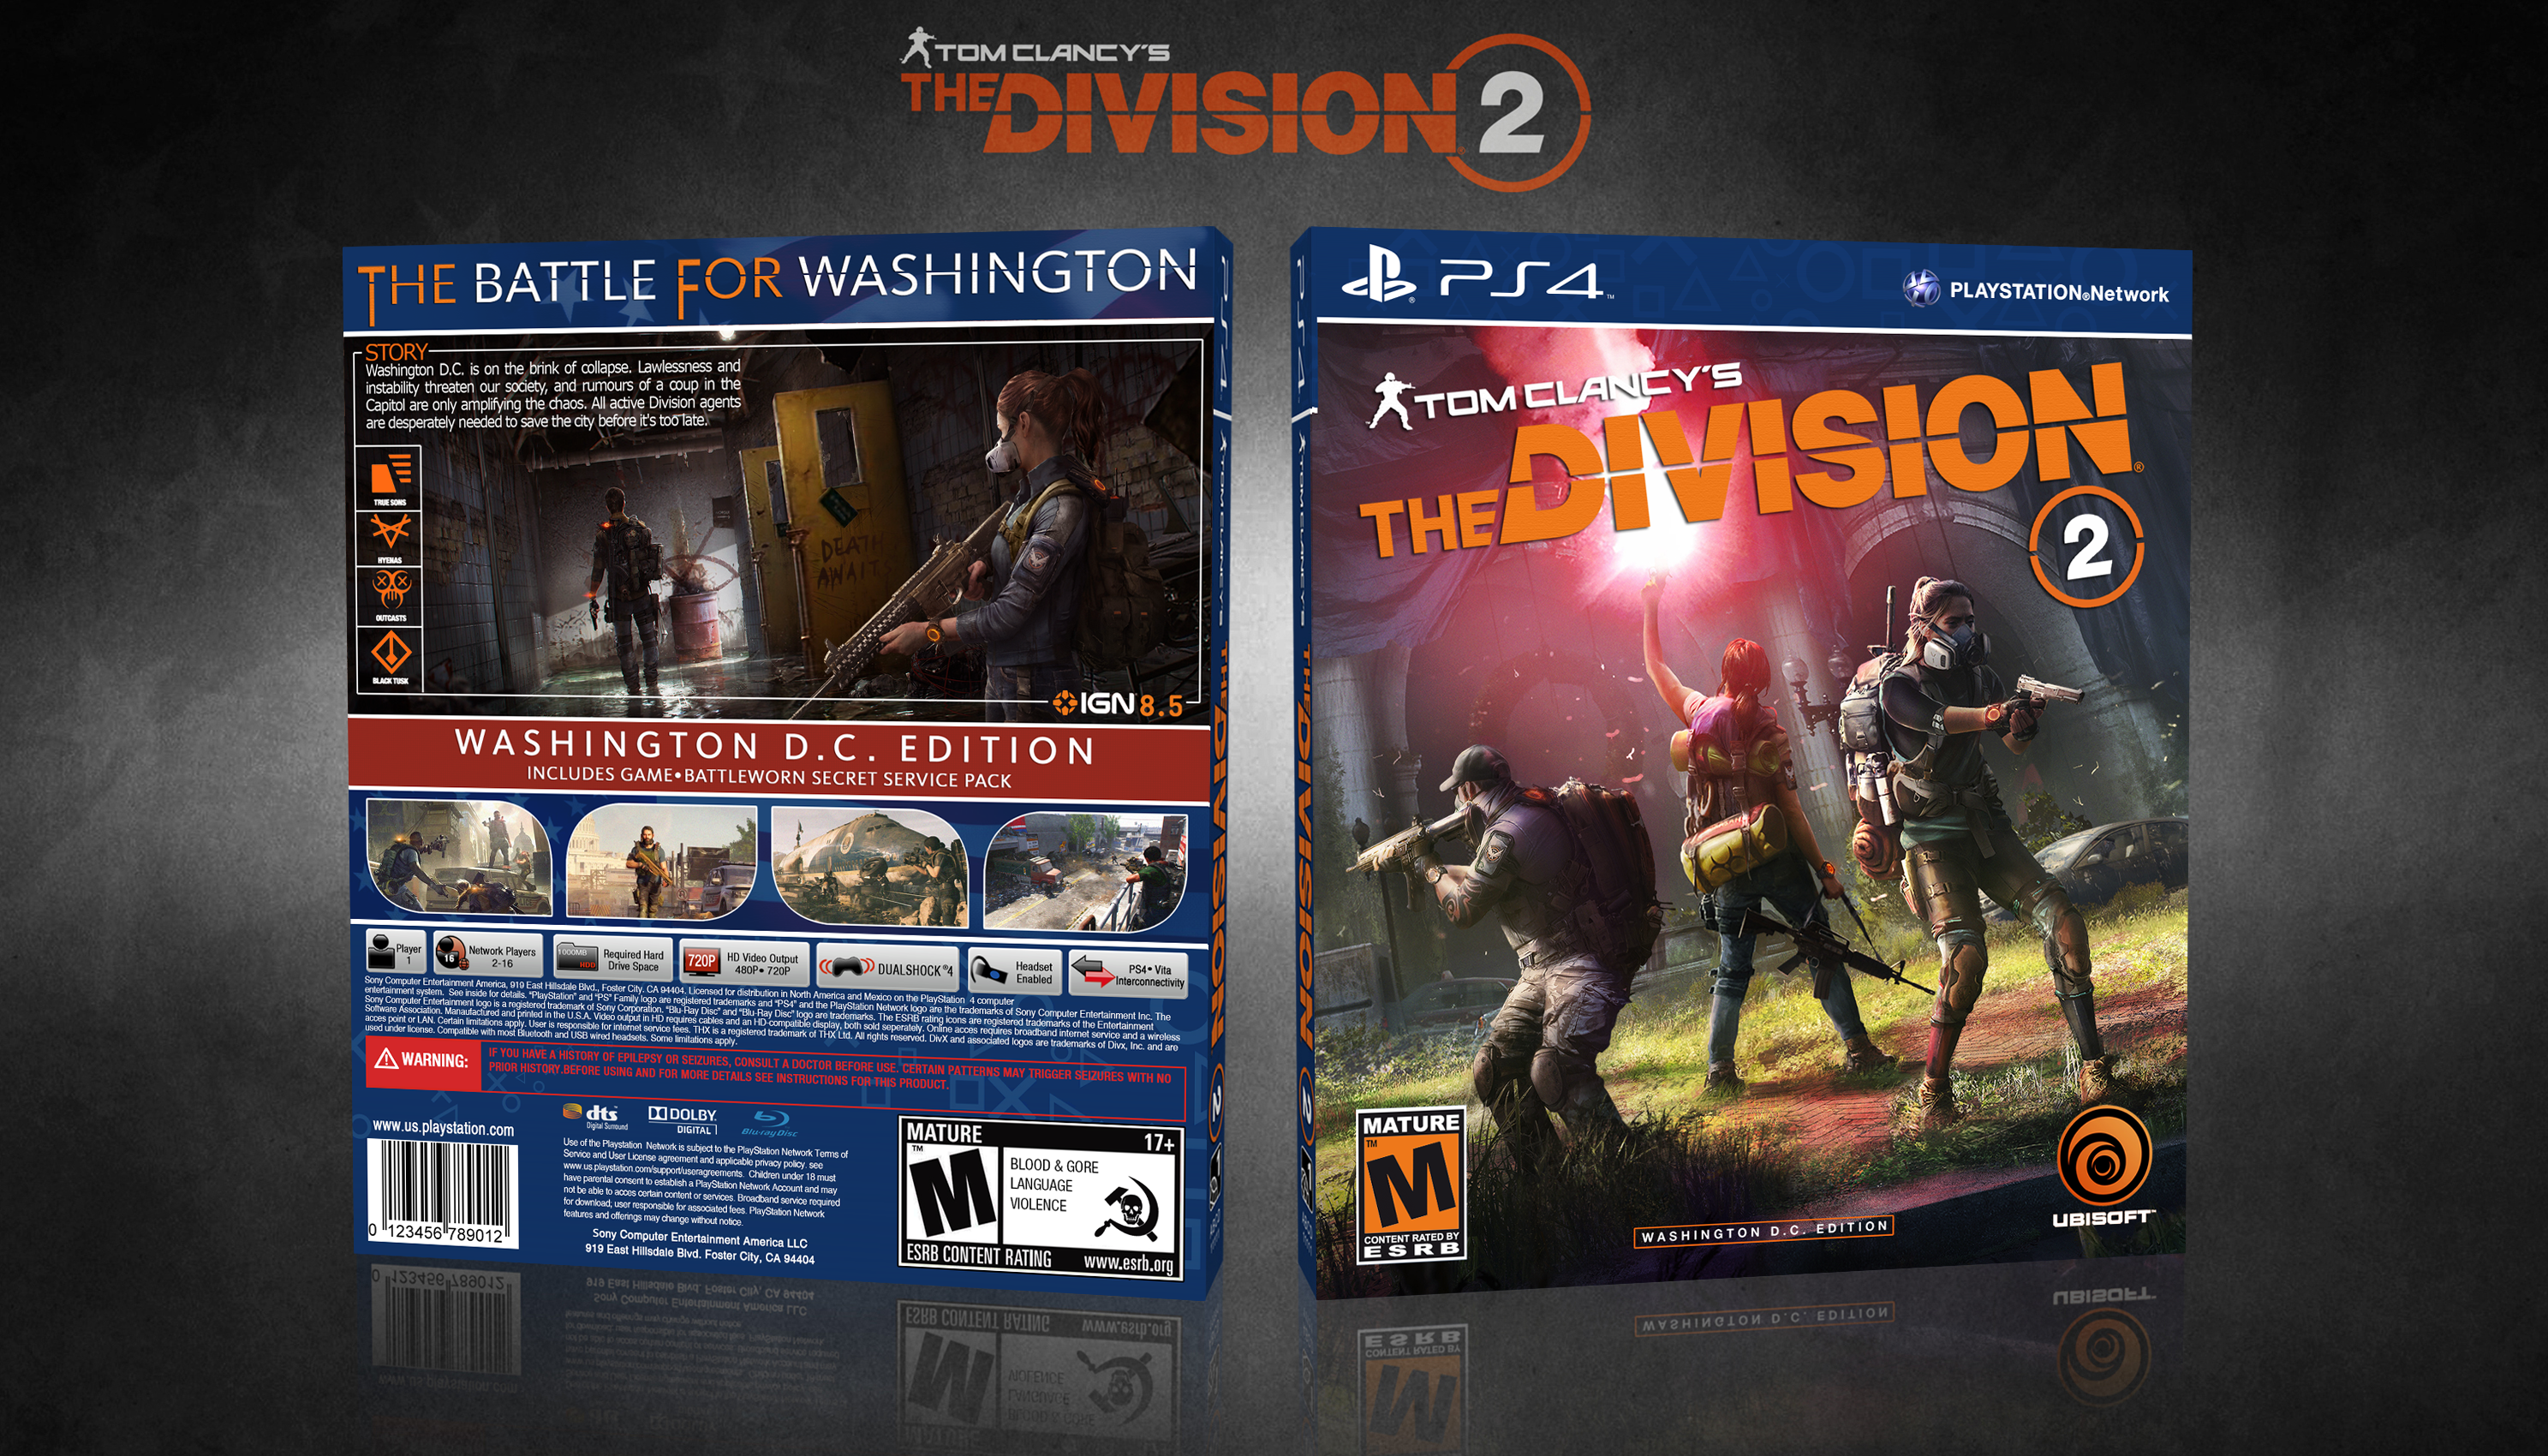 Tom Clancy’s The Division 2 box cover